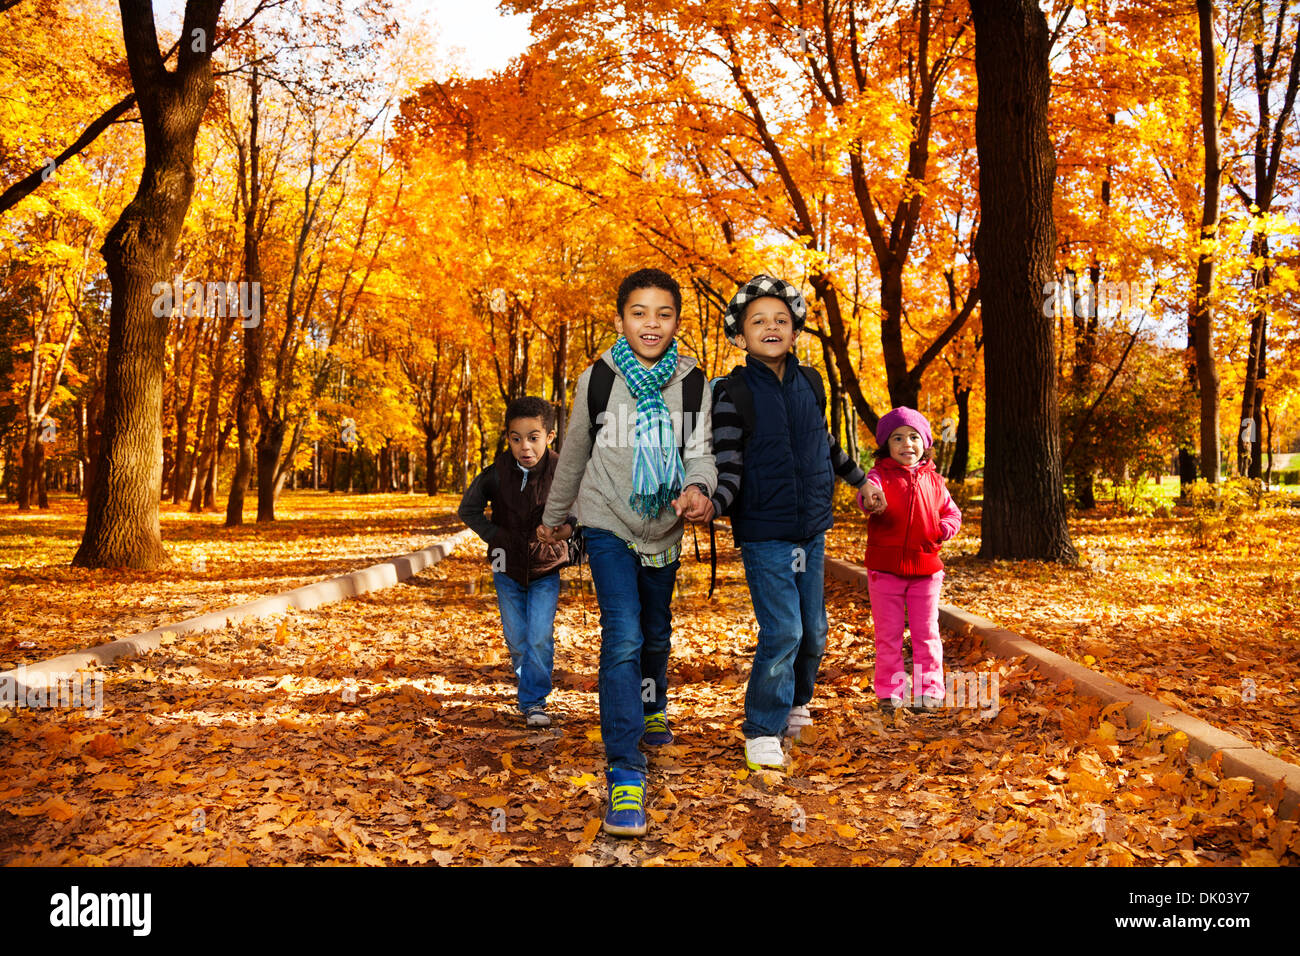 Group of four black boys and girl, happy brothers and sister 3-10 years old going together holding hands in the park wearing backpacks and autumn clothes in maple park Stock Photo